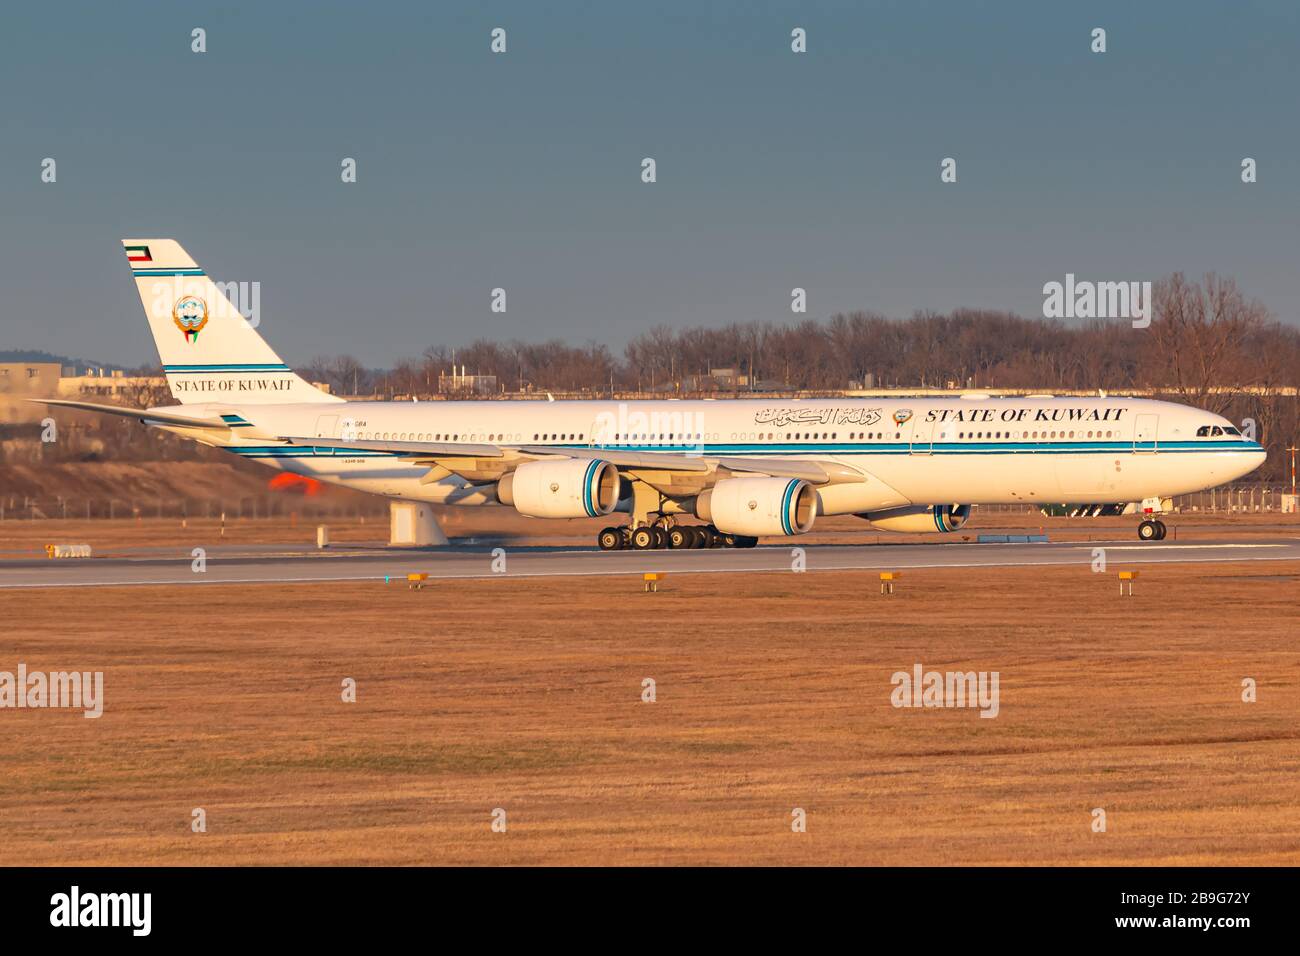 Munich, Germany - February 15, 2020: Kuwait Airways Airbus A340  airplane at Munich airport (MUC) in Germany. Airbus is an aircraft manufacturer from Stock Photo